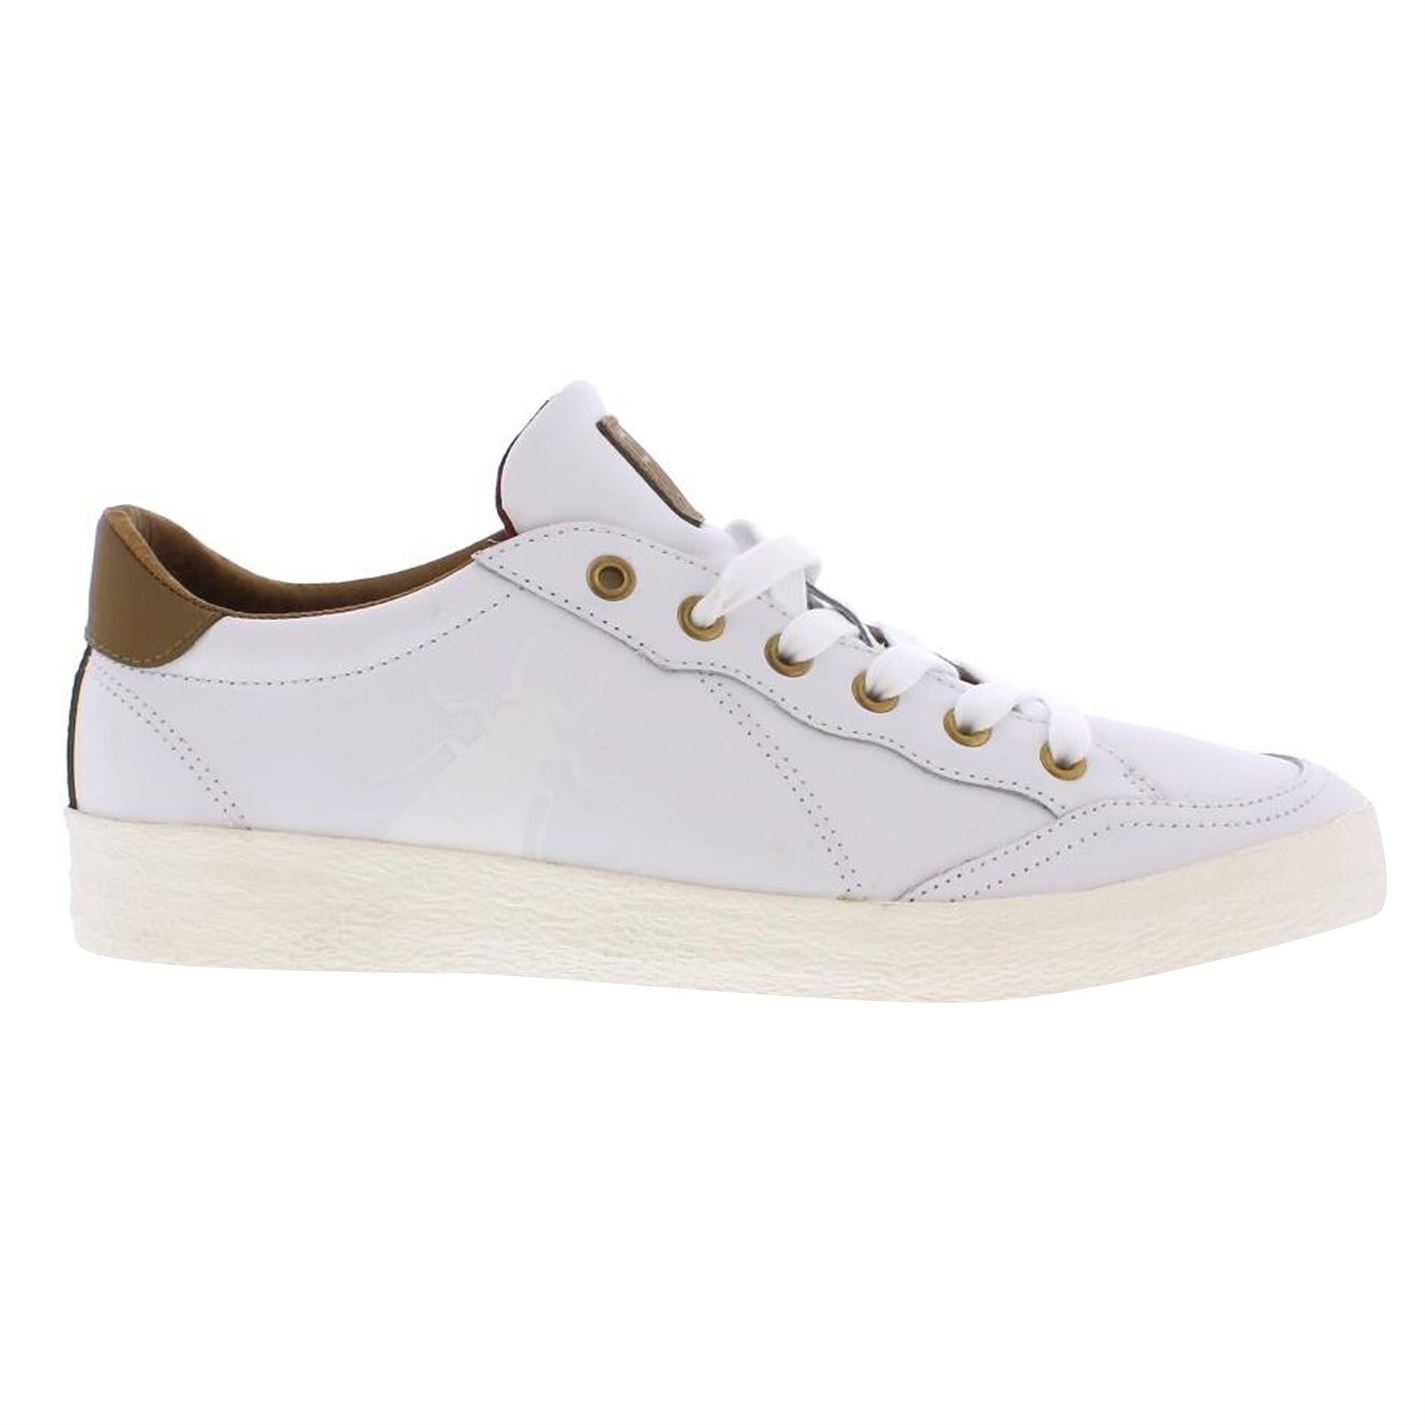 Fly London Bato Trainers